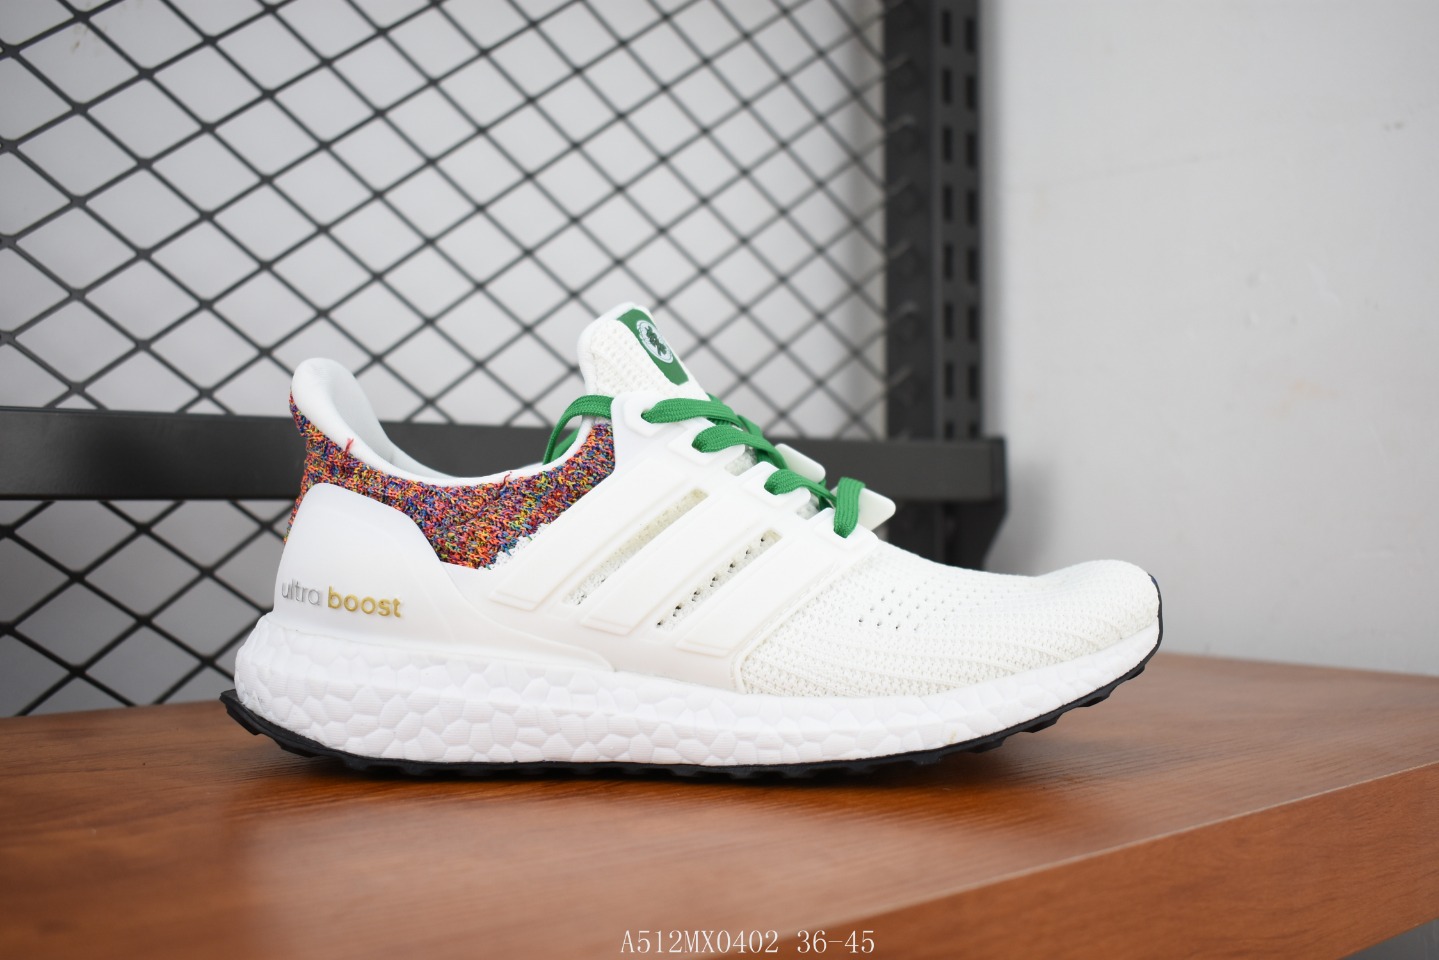 adidas Pure Boost DPR Trainer vs Ultra Boost Review The